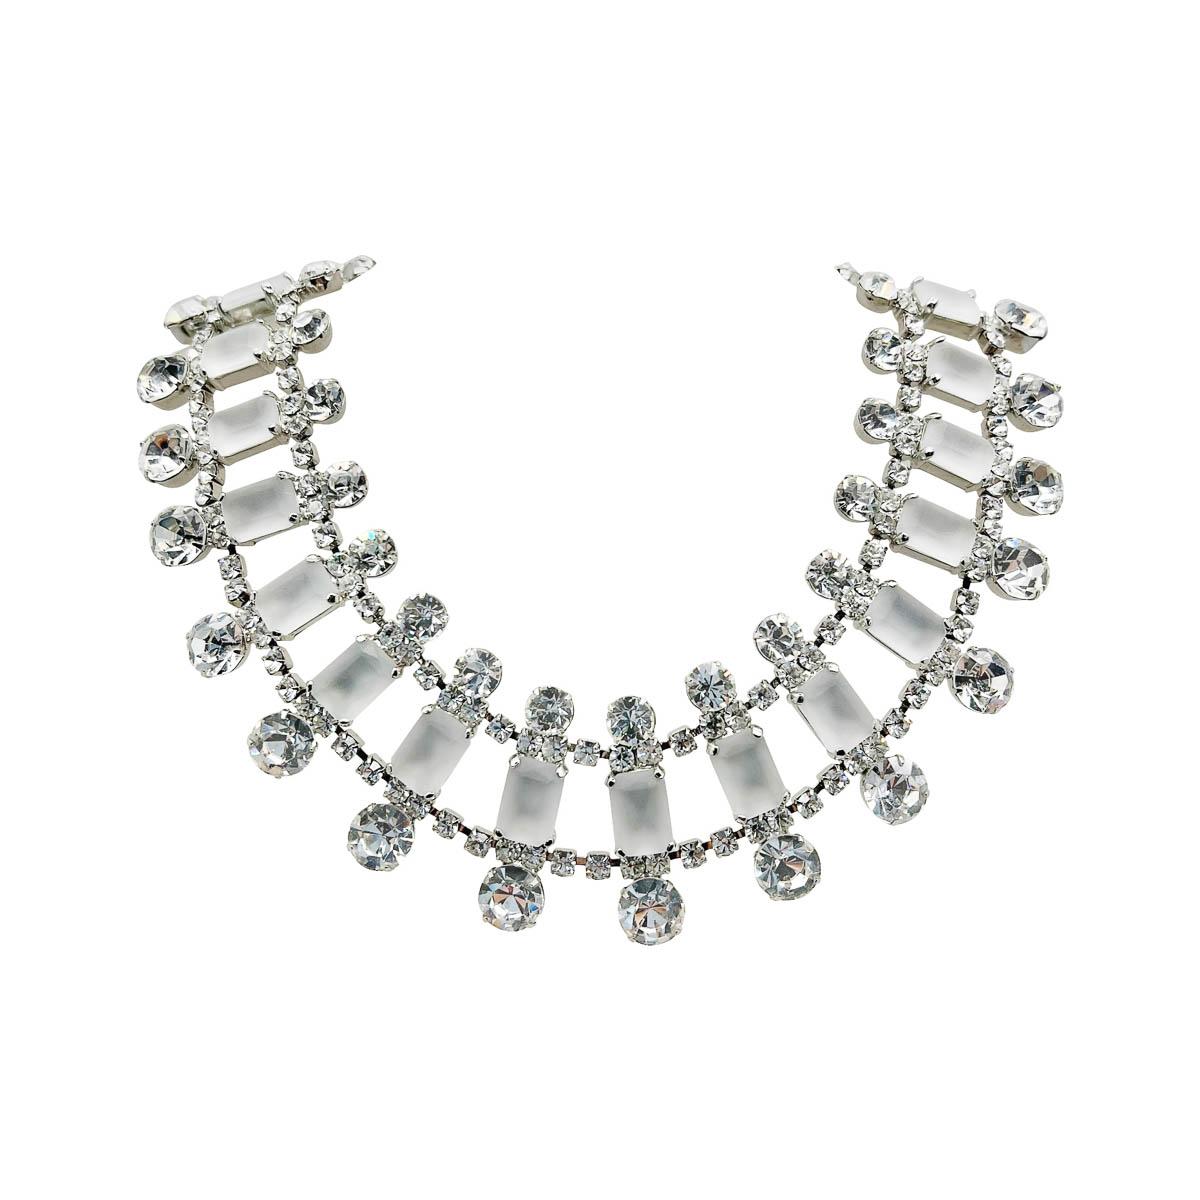 A spectacular Vintage KJL Ice Collar Necklace. A wonderful 360 design ensures sparkle from every angle. The broad collar set with opaque white emerald cut stones surrounded by chaton in varying sizes. The effect is stunning and ultra glamorous.